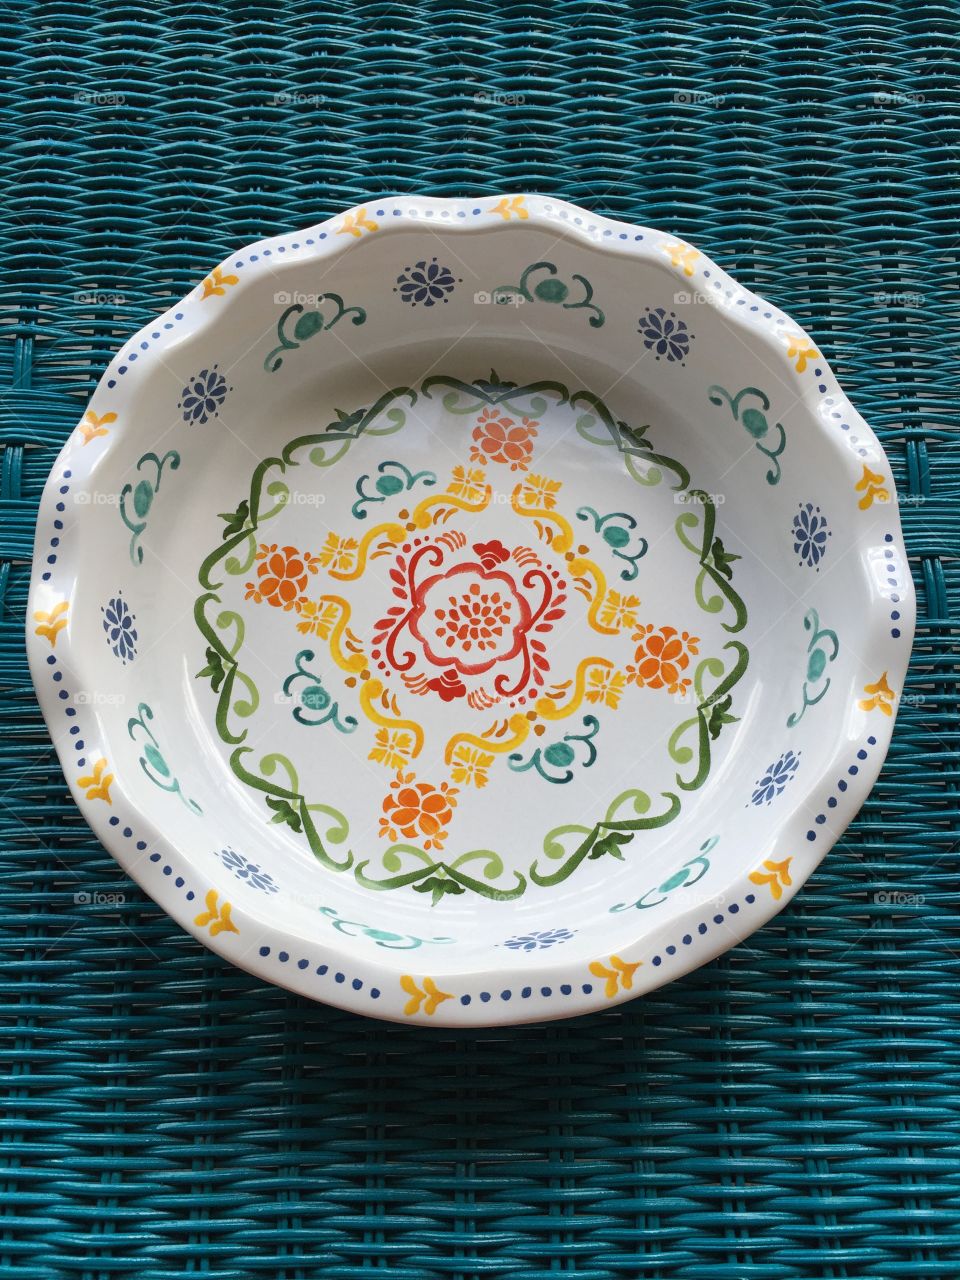 Summertime Dish. Colorful dish on a wicker table 